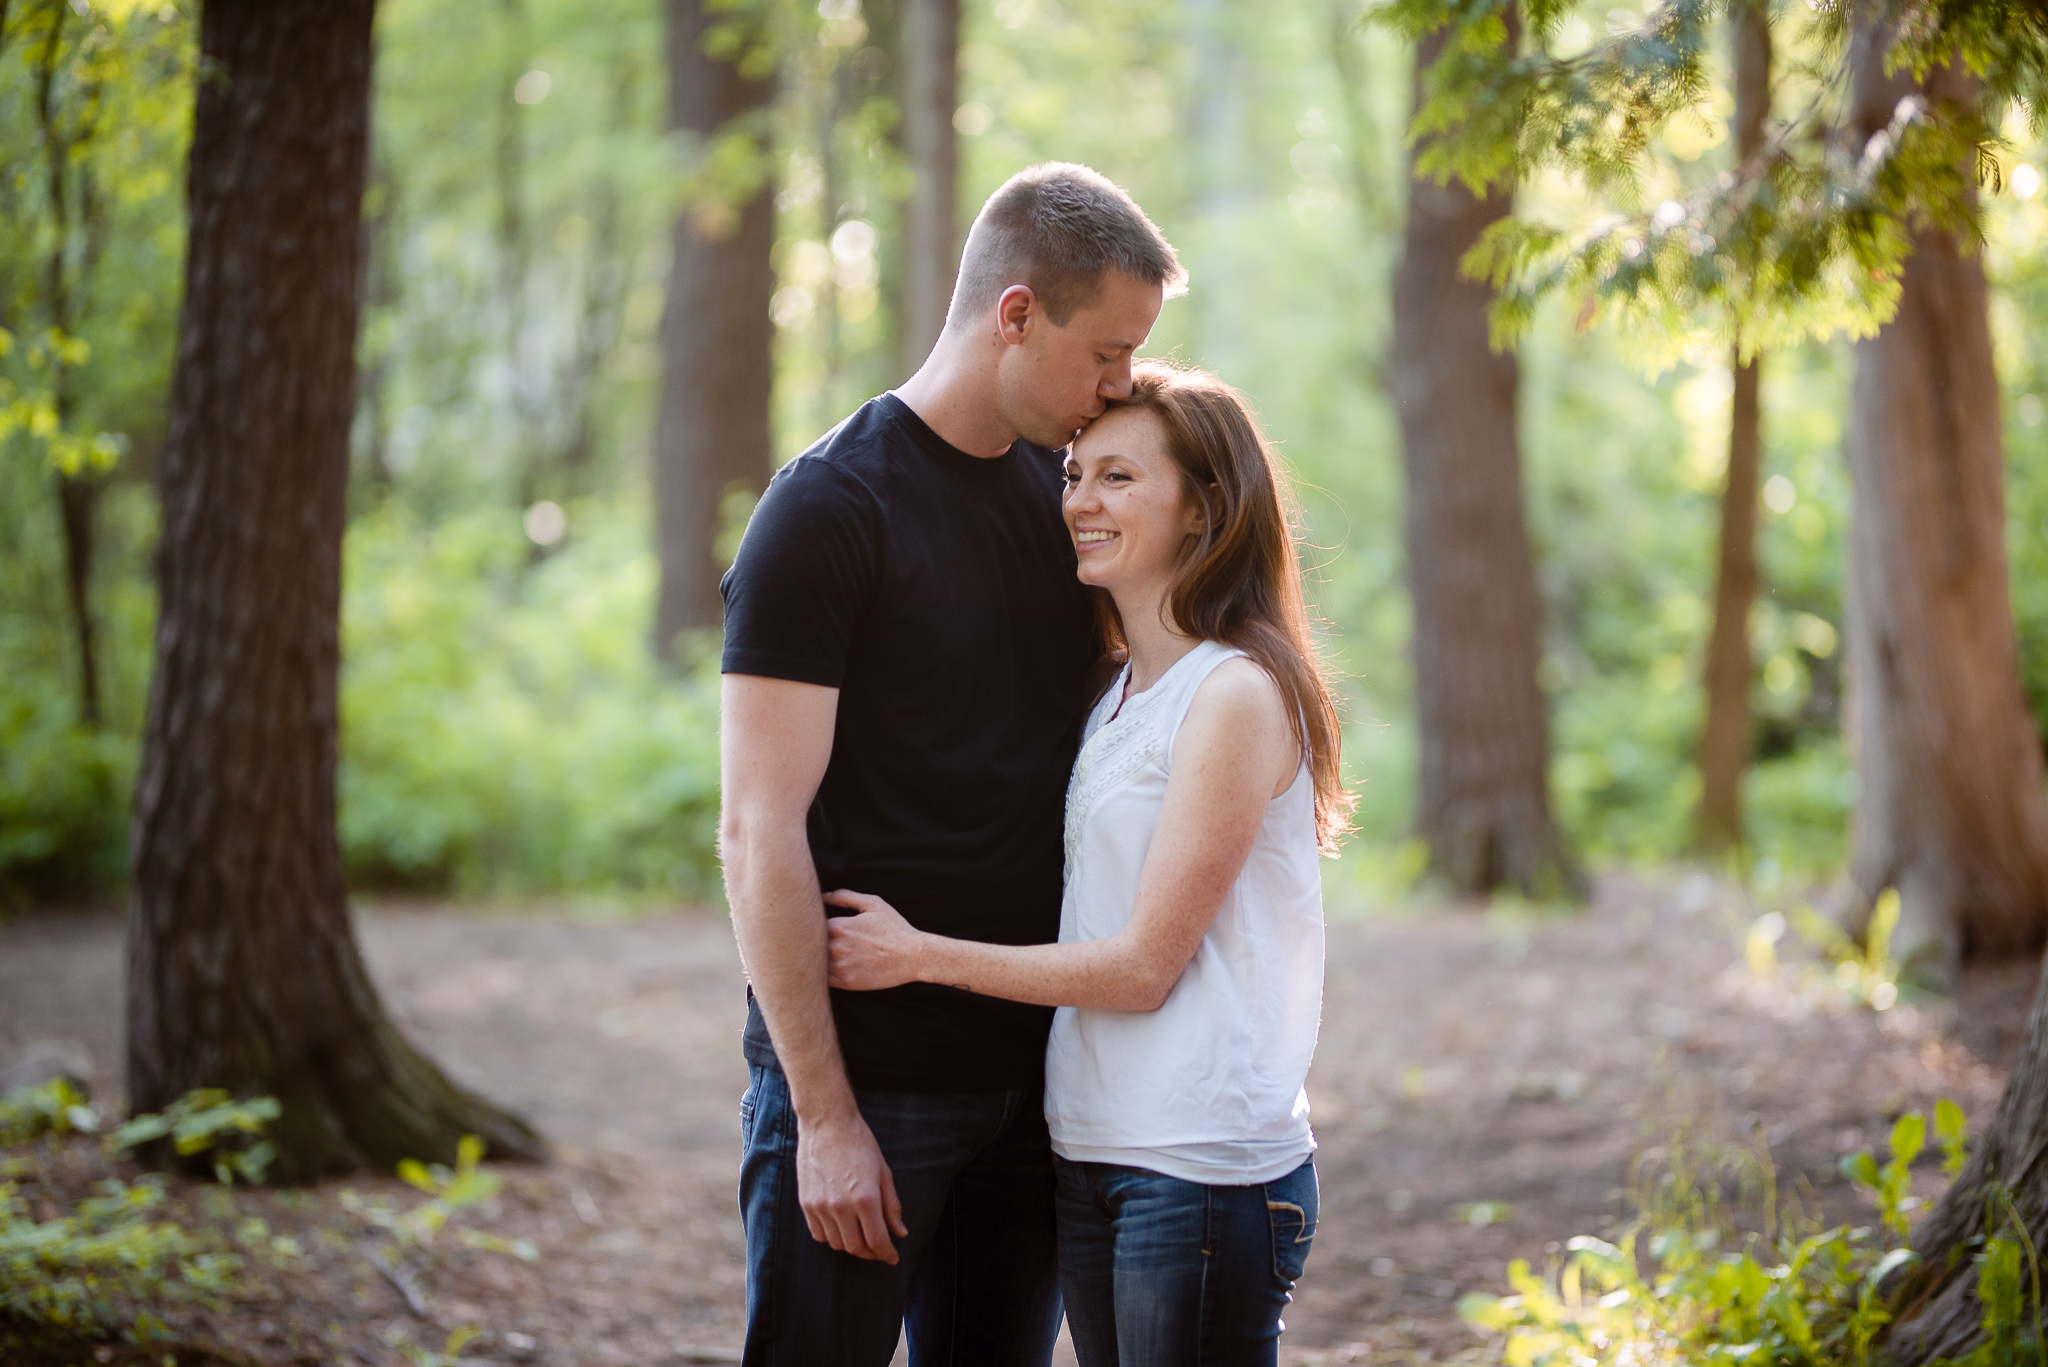 Couples76NaomiLuciennePhotography062019-5-Edit.jpg